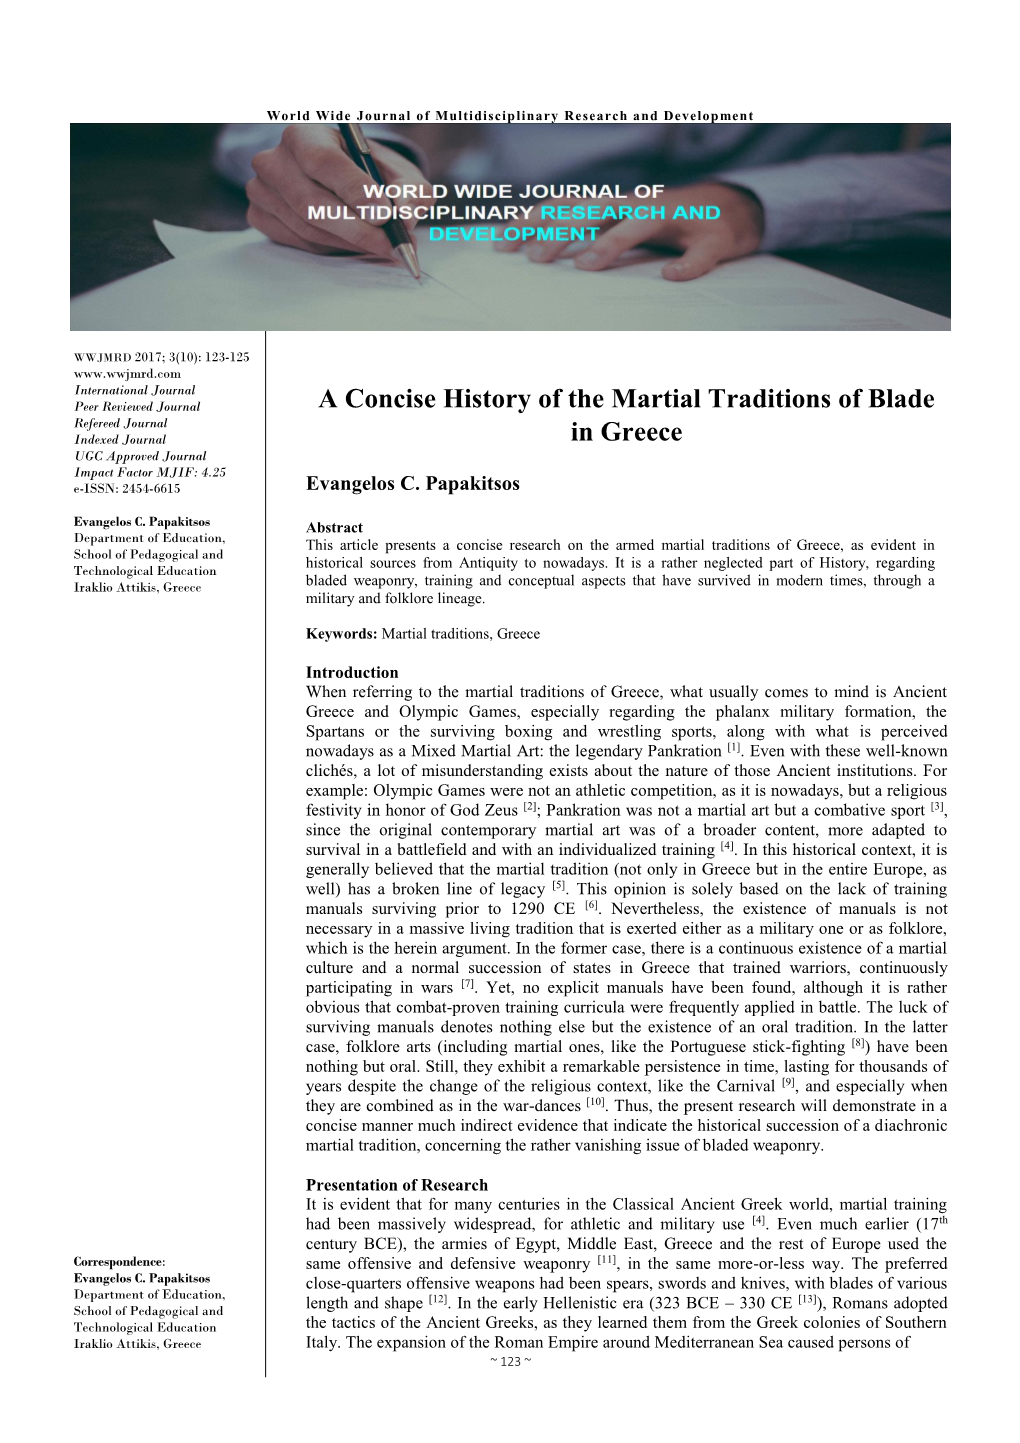 A Concise History of the Martial Traditions of Blade in Greece